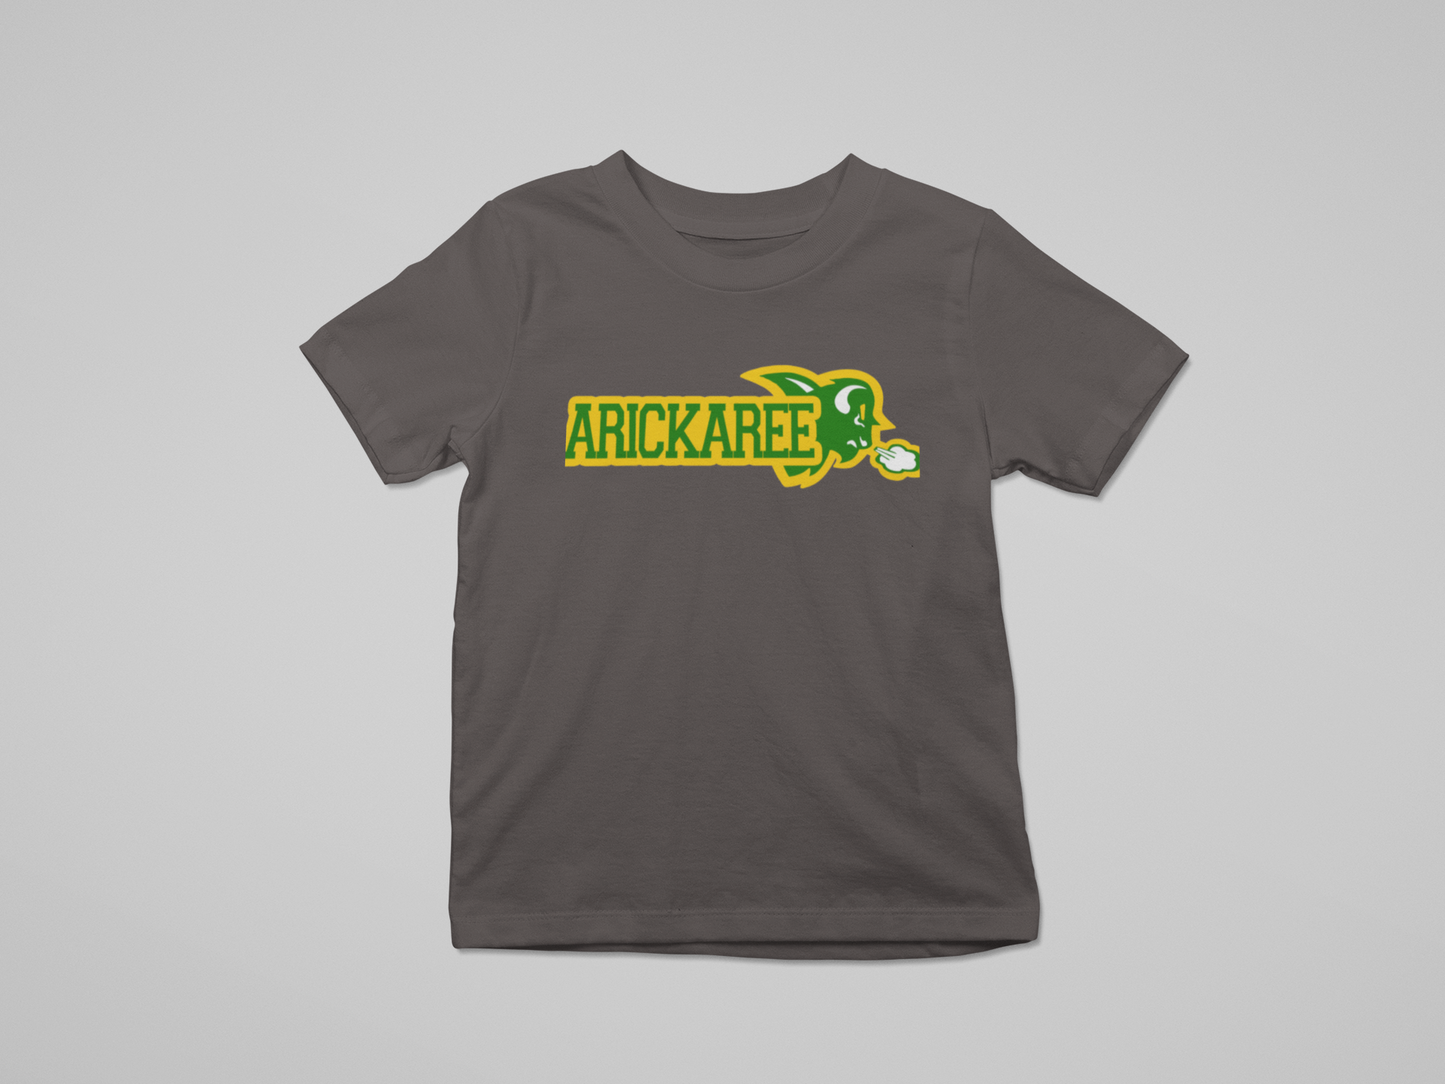 arickaree bison toddler t-shirt: for cute bison fans only!